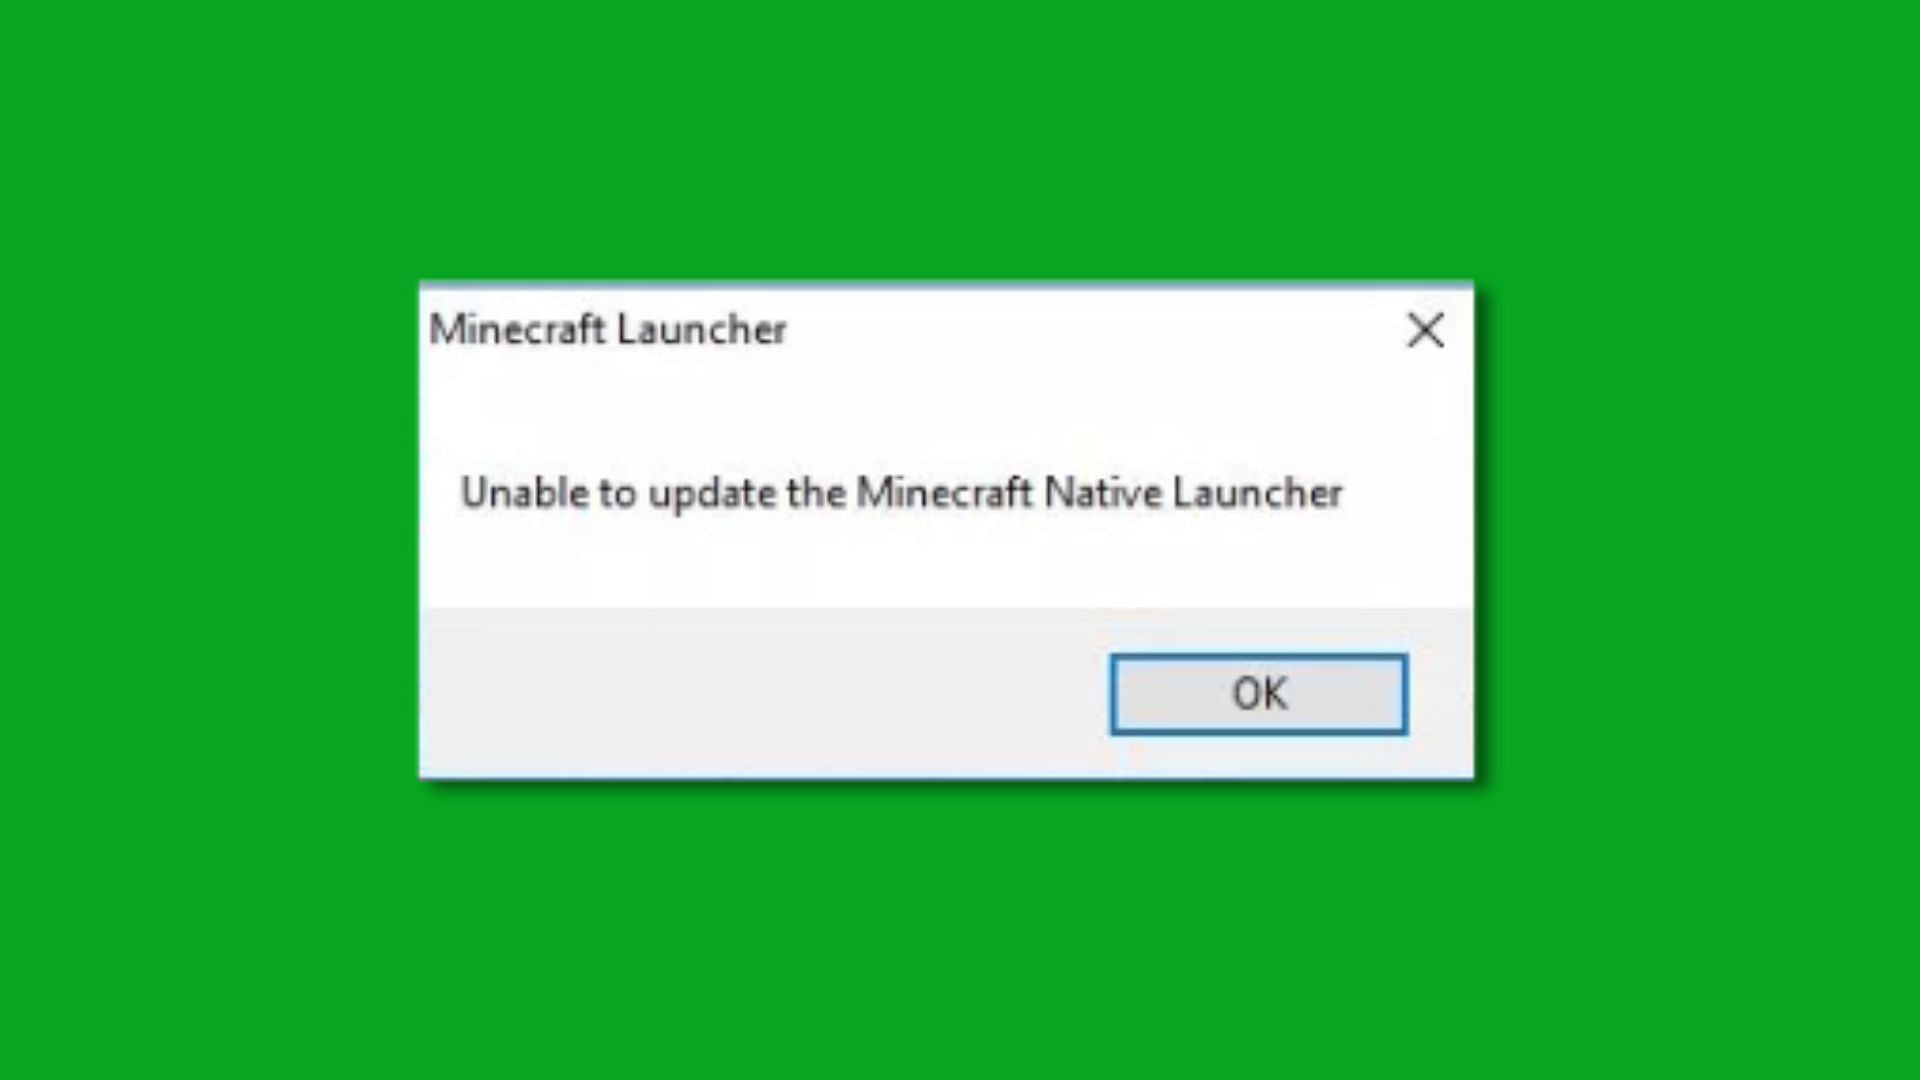 The issue message prevents (Image via Microsoft Answers/mani34521)